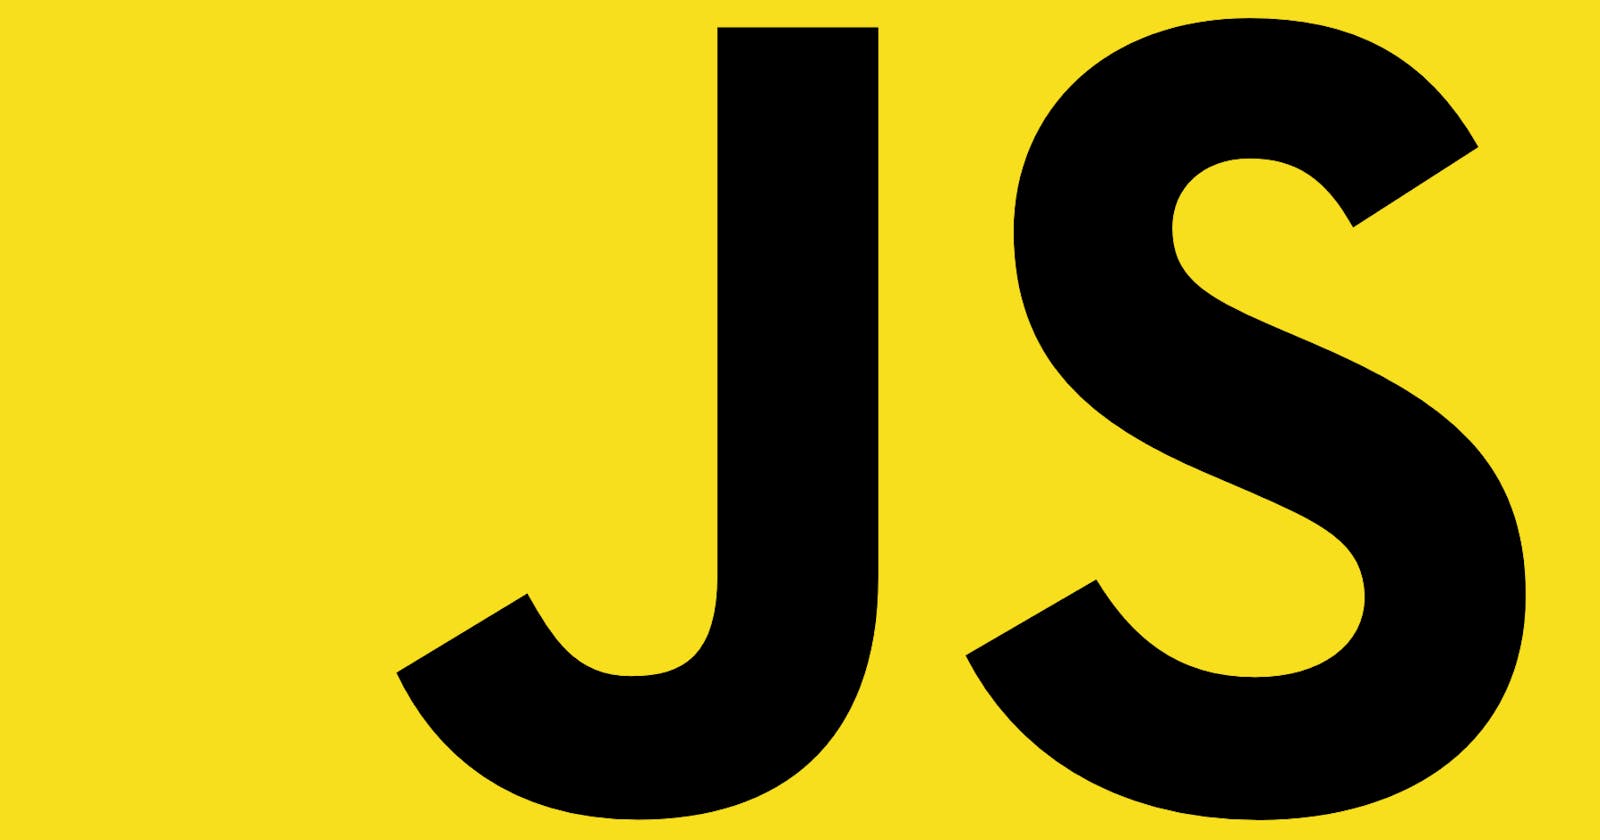 What happens to your JavaScript code when it leaves the editor?